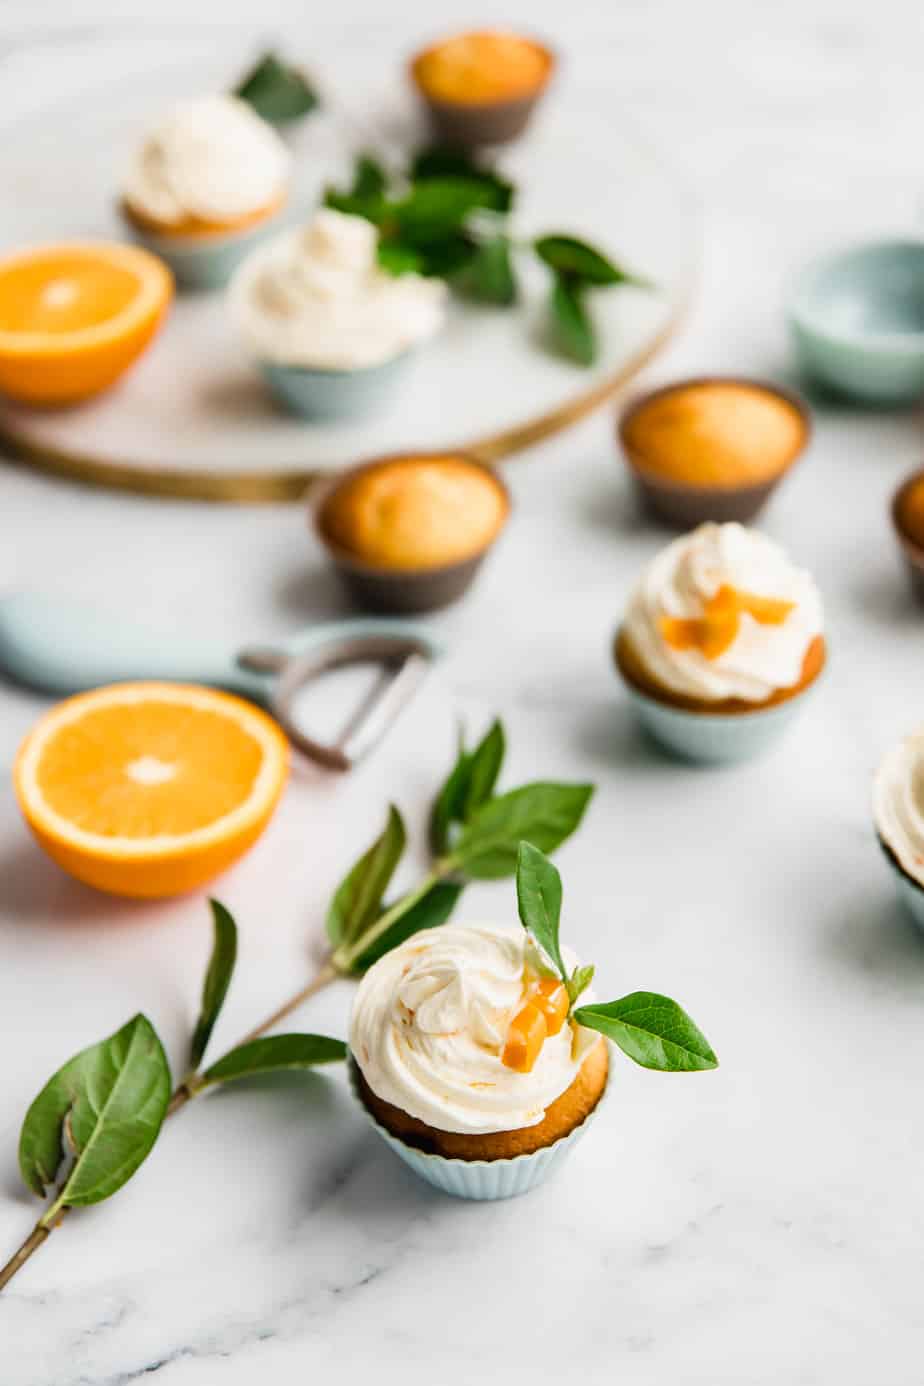 Vanilla cupcakes and fresh oranges on a marble background.